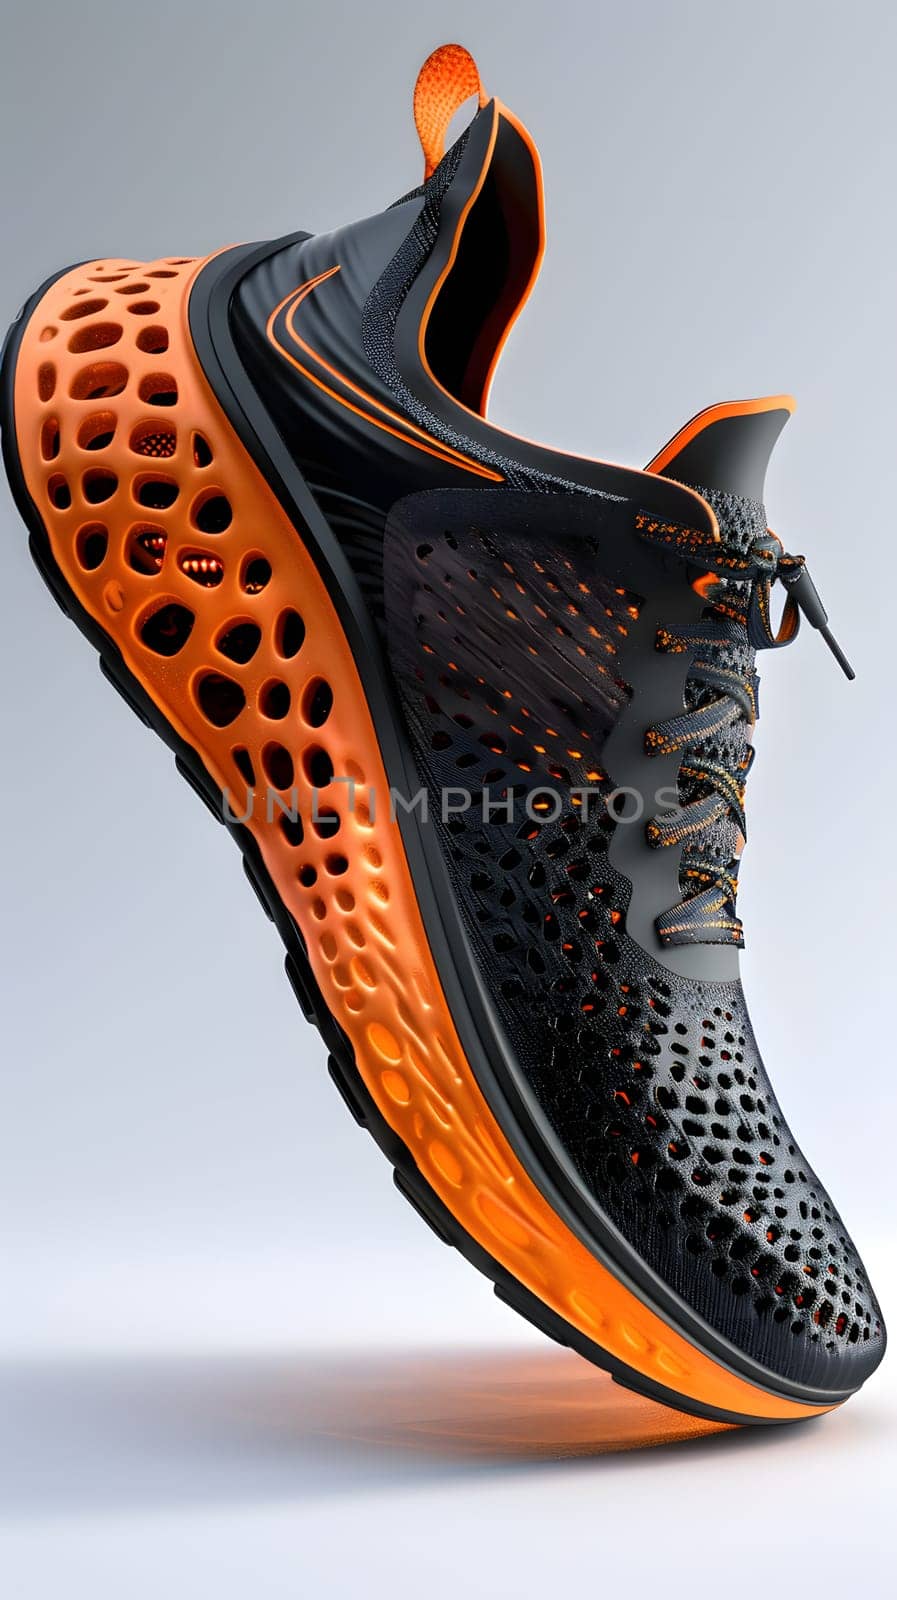 Pair of black and orange athletic shoes on white surface by Nadtochiy